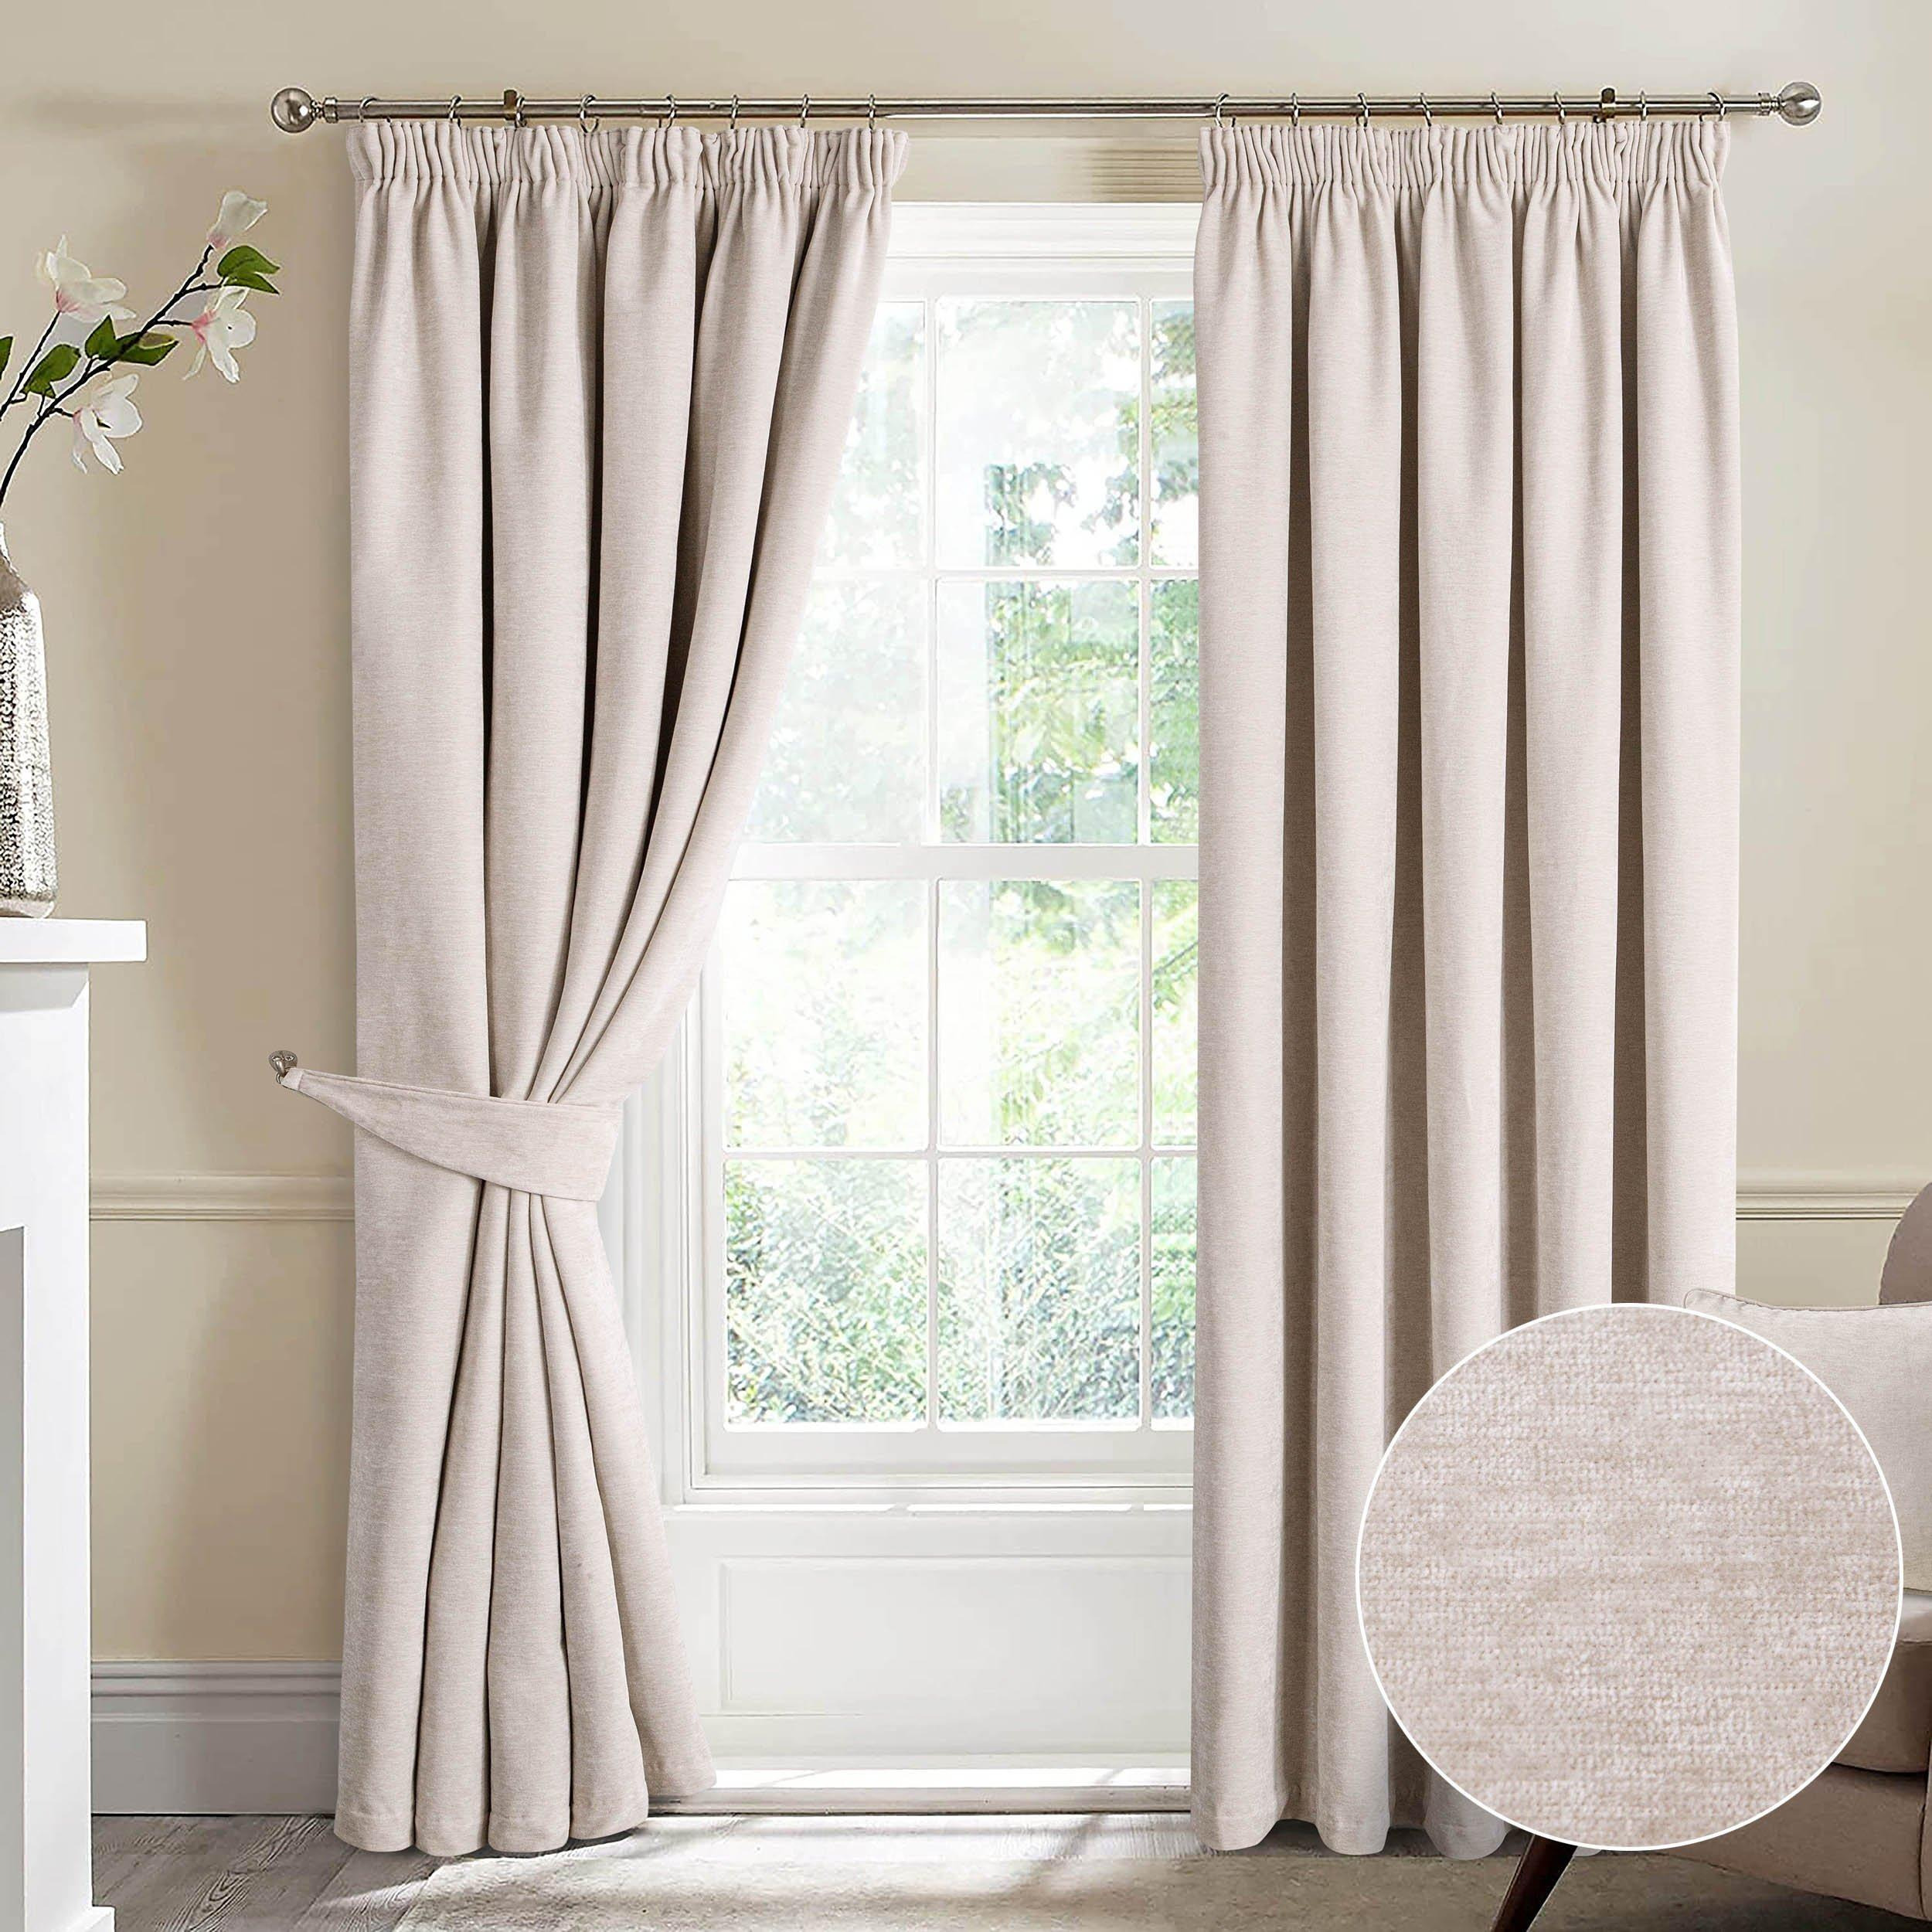 Camden Crushed Chenille Complete Blackout Lined Pencil Pleat Curtains pair - image 1